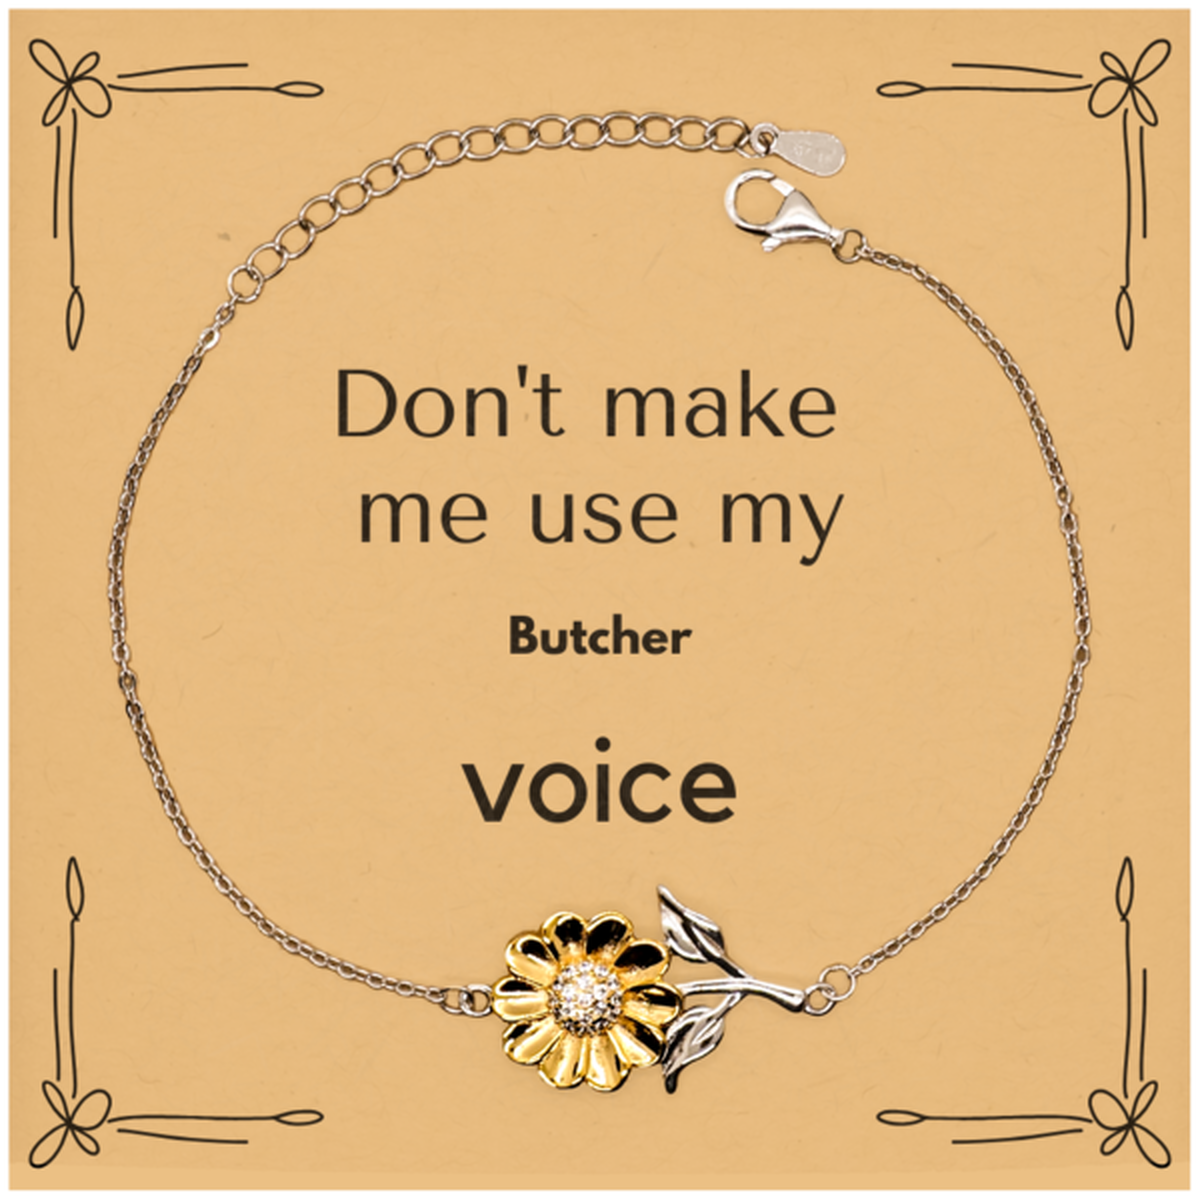 Don't make me use my Butcher voice, Sarcasm Butcher Card Gifts, Christmas Butcher Sunflower Bracelet Birthday Unique Gifts For Butcher Coworkers, Men, Women, Colleague, Friends